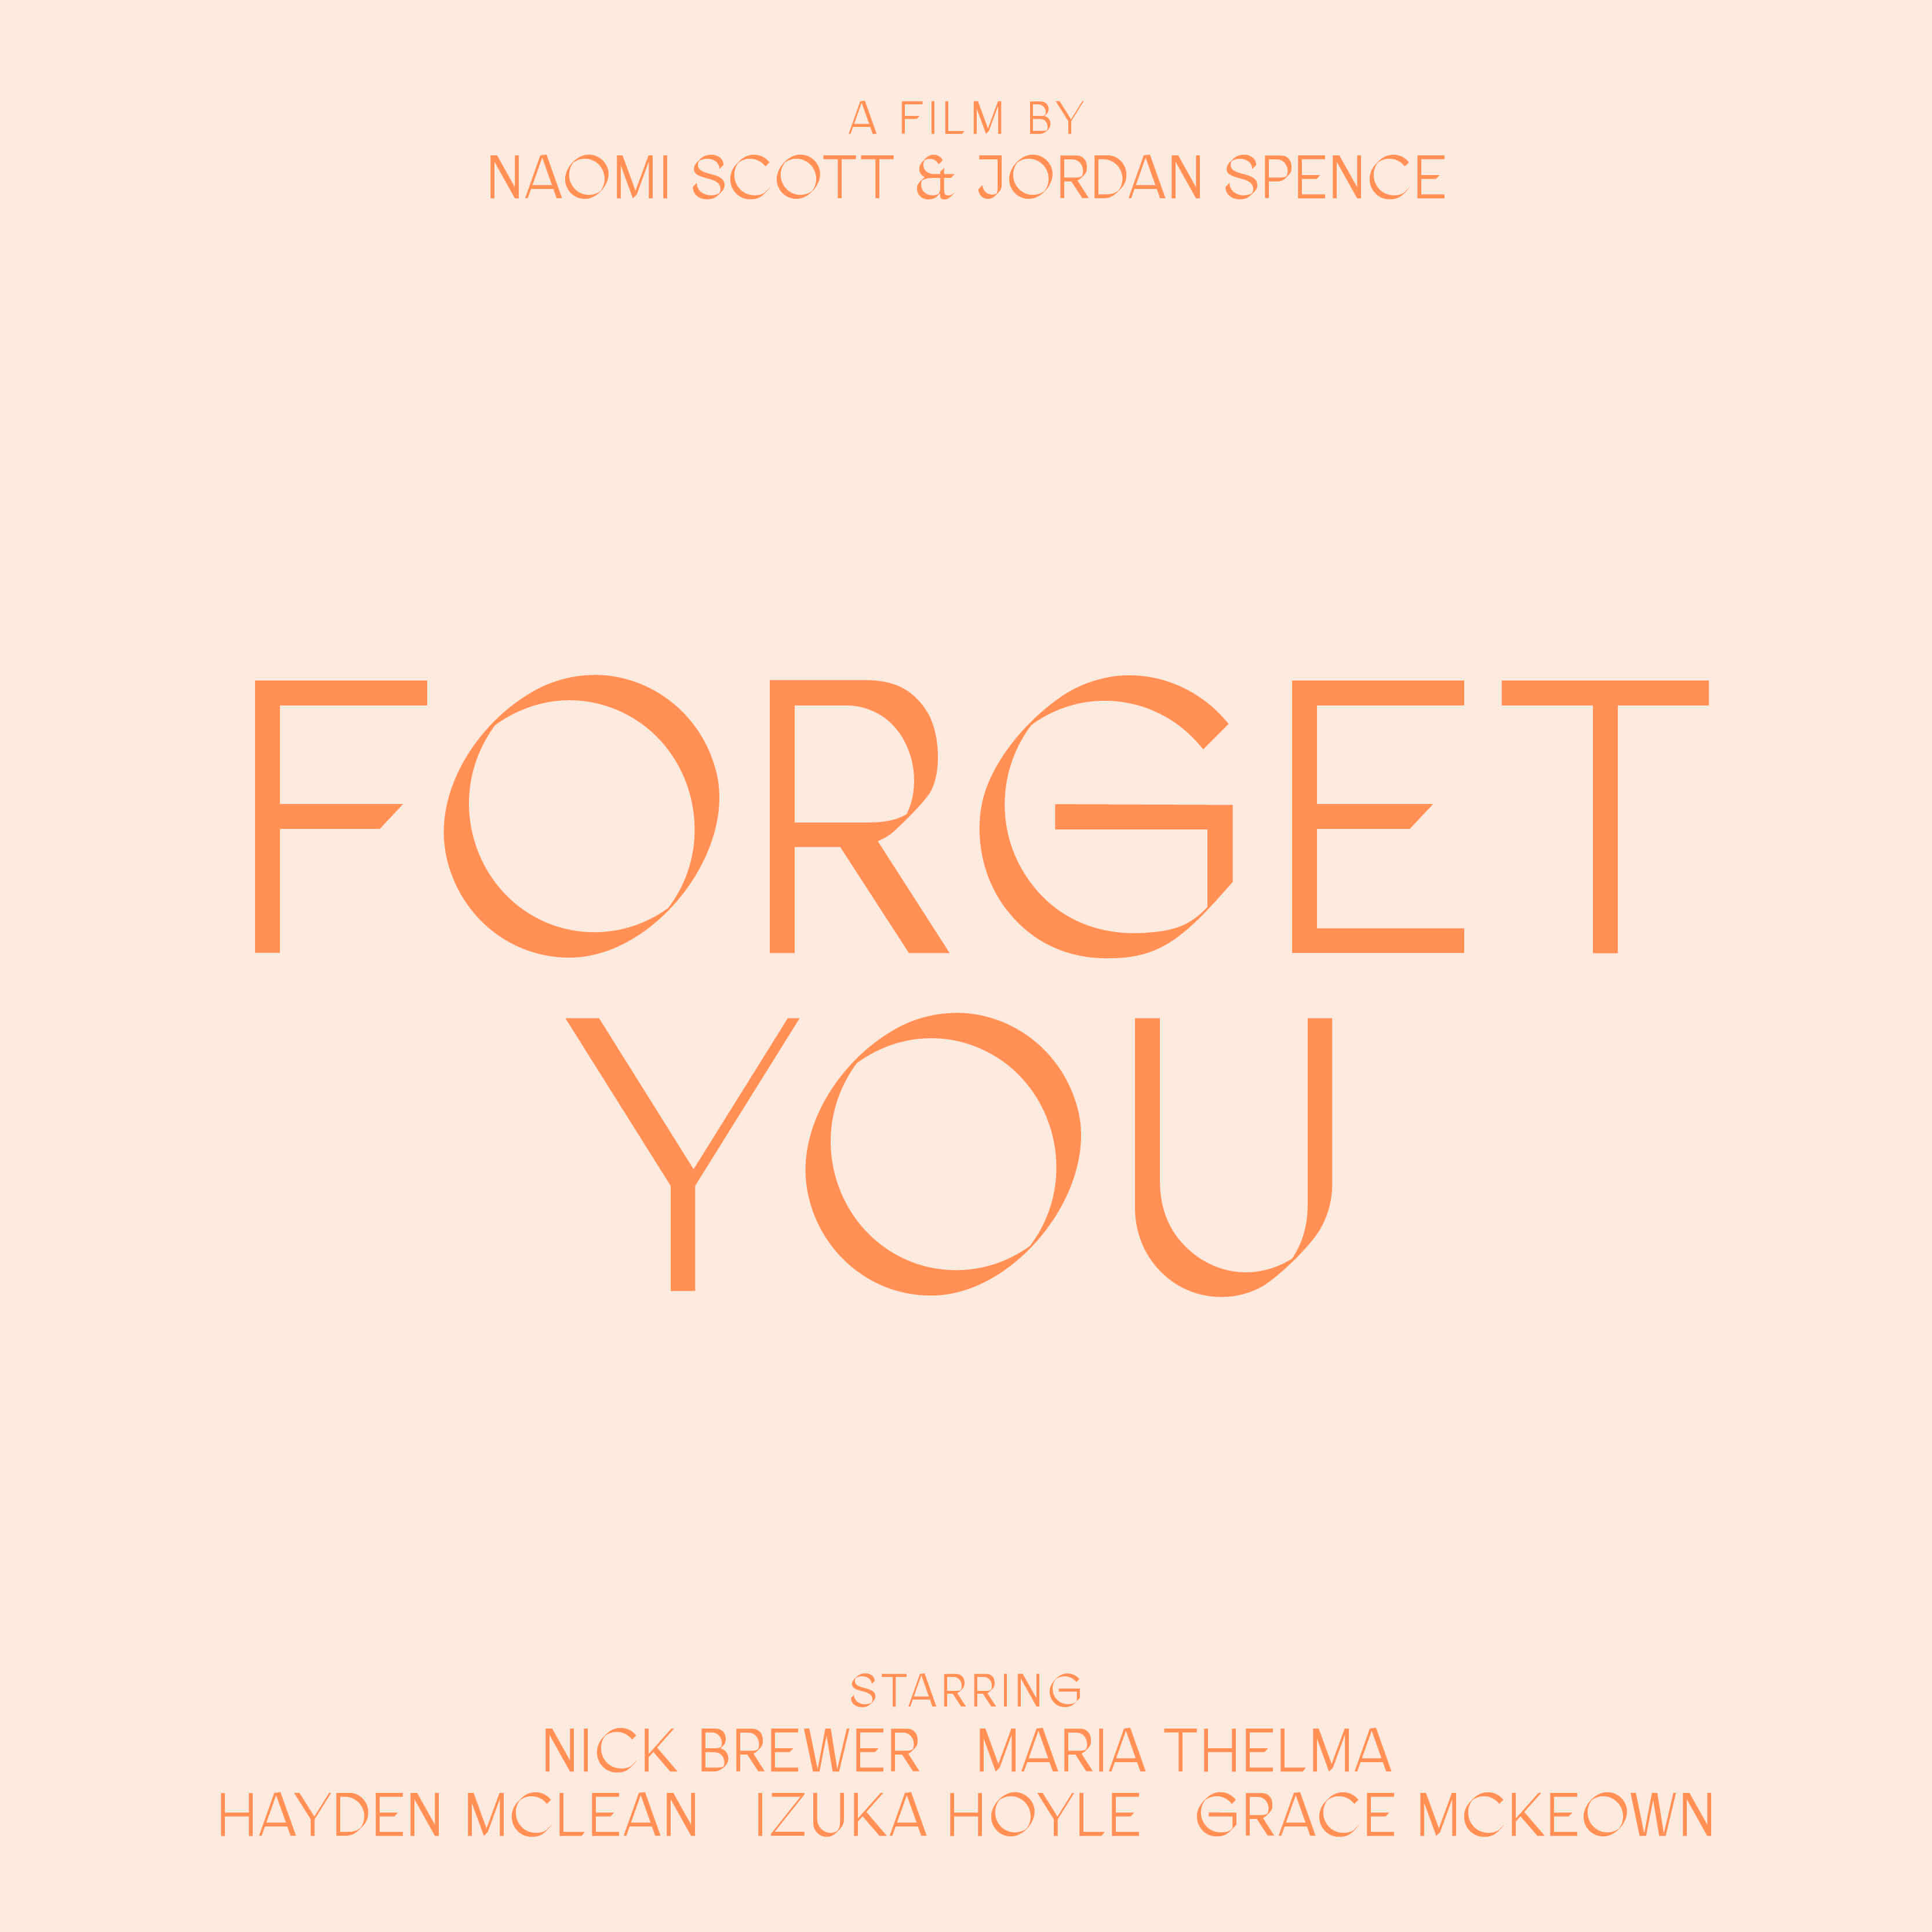 Typographical social post announcing new film 'Forget You' by Naomie Scott and Jordan Spence